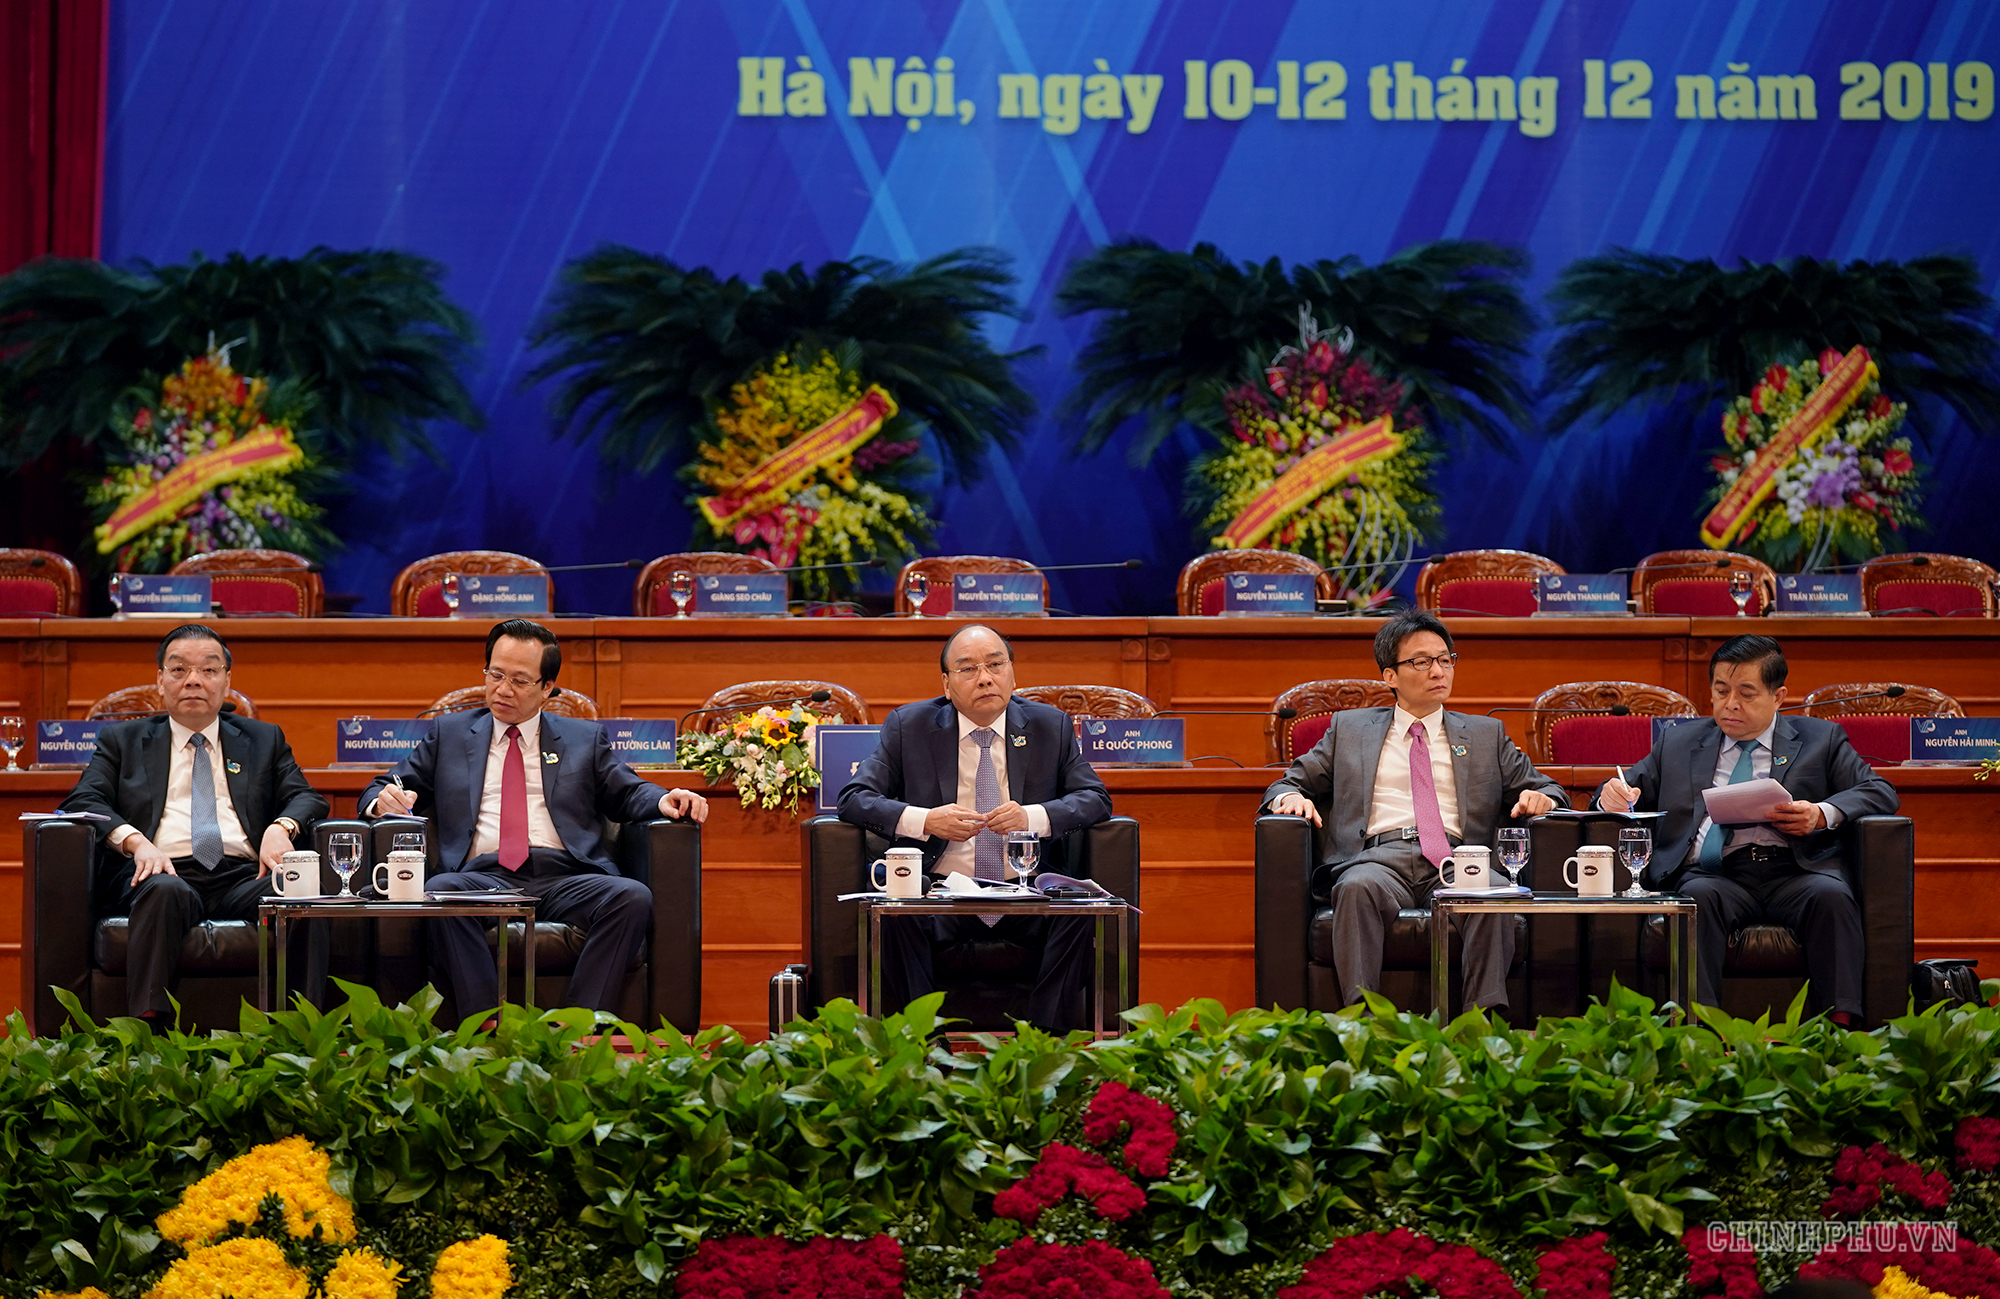 Youth Law 2020: The Prime Minister of Vietnam must hold a dialogue with the youth at least once a year (Internet image)